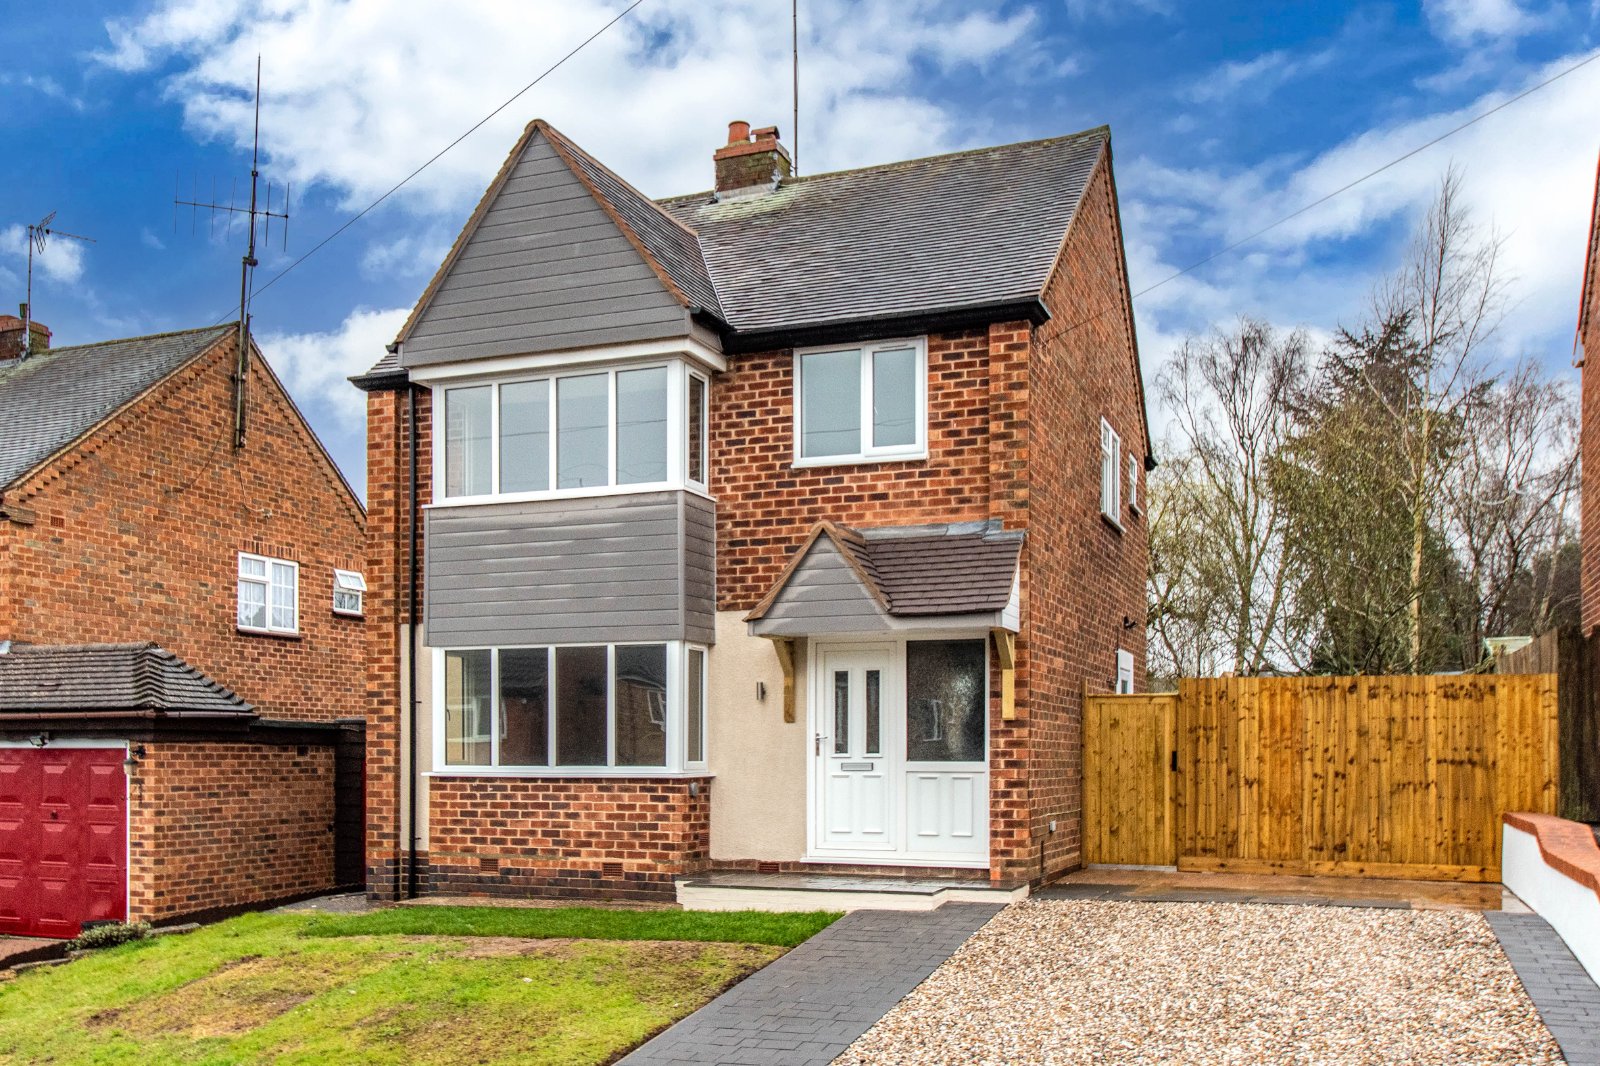 3 bed house for sale in Byron Road, Redditch - Property Image 1